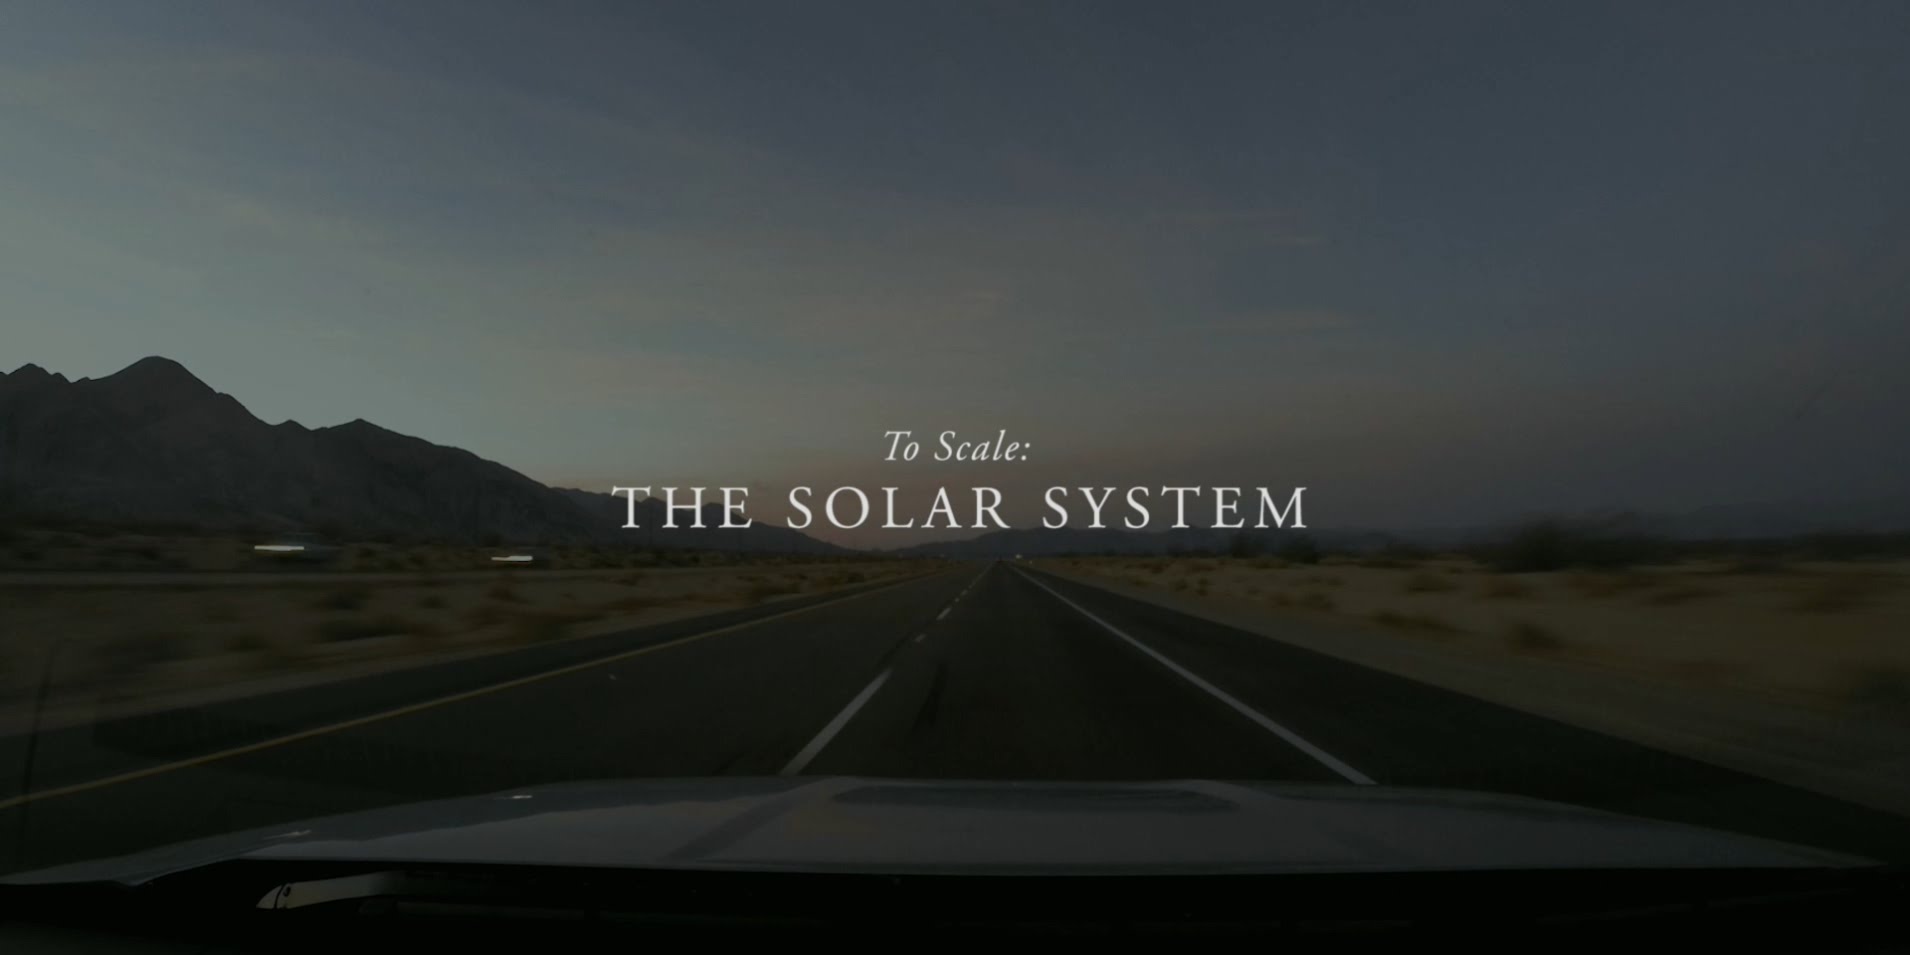 To Scale: The Solar System (2015) - A true illustration of our place in the universe